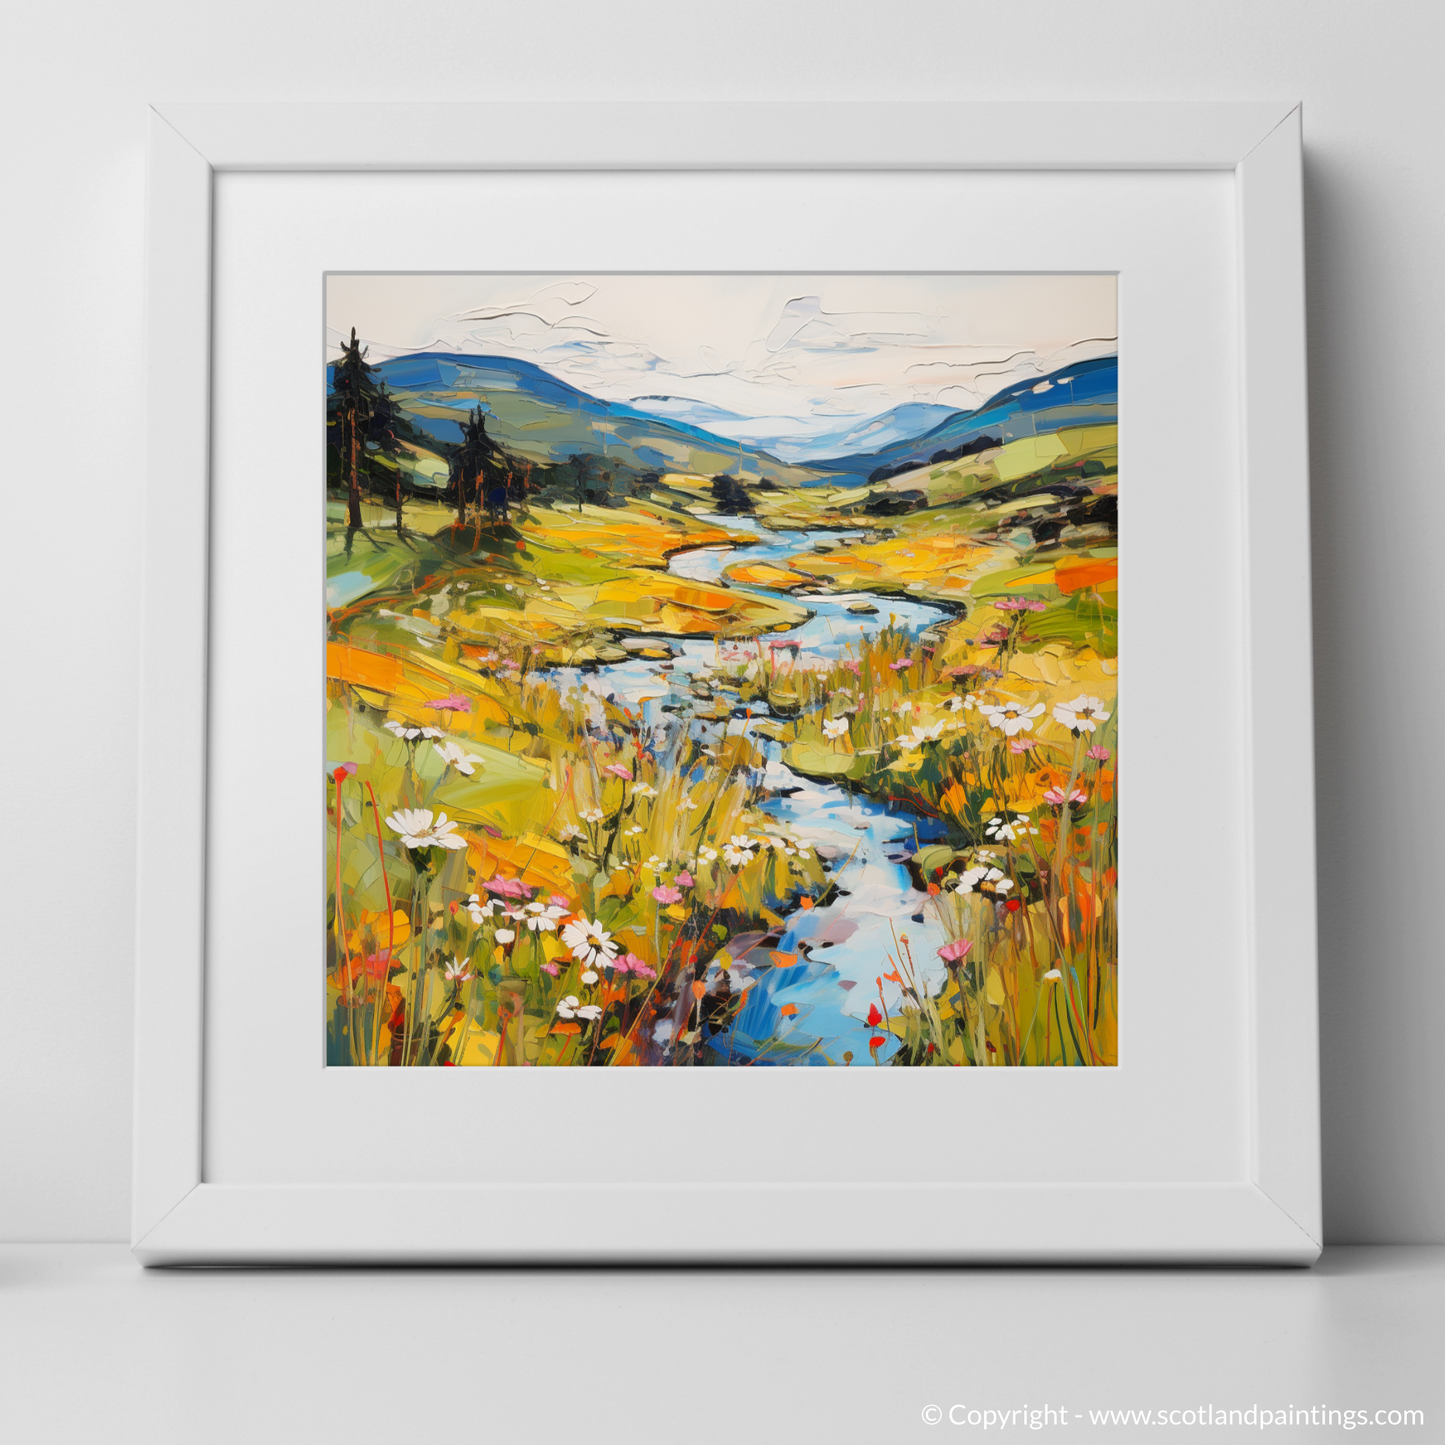 Art Print of Glen Rosa, Isle of Arran in summer with a white frame